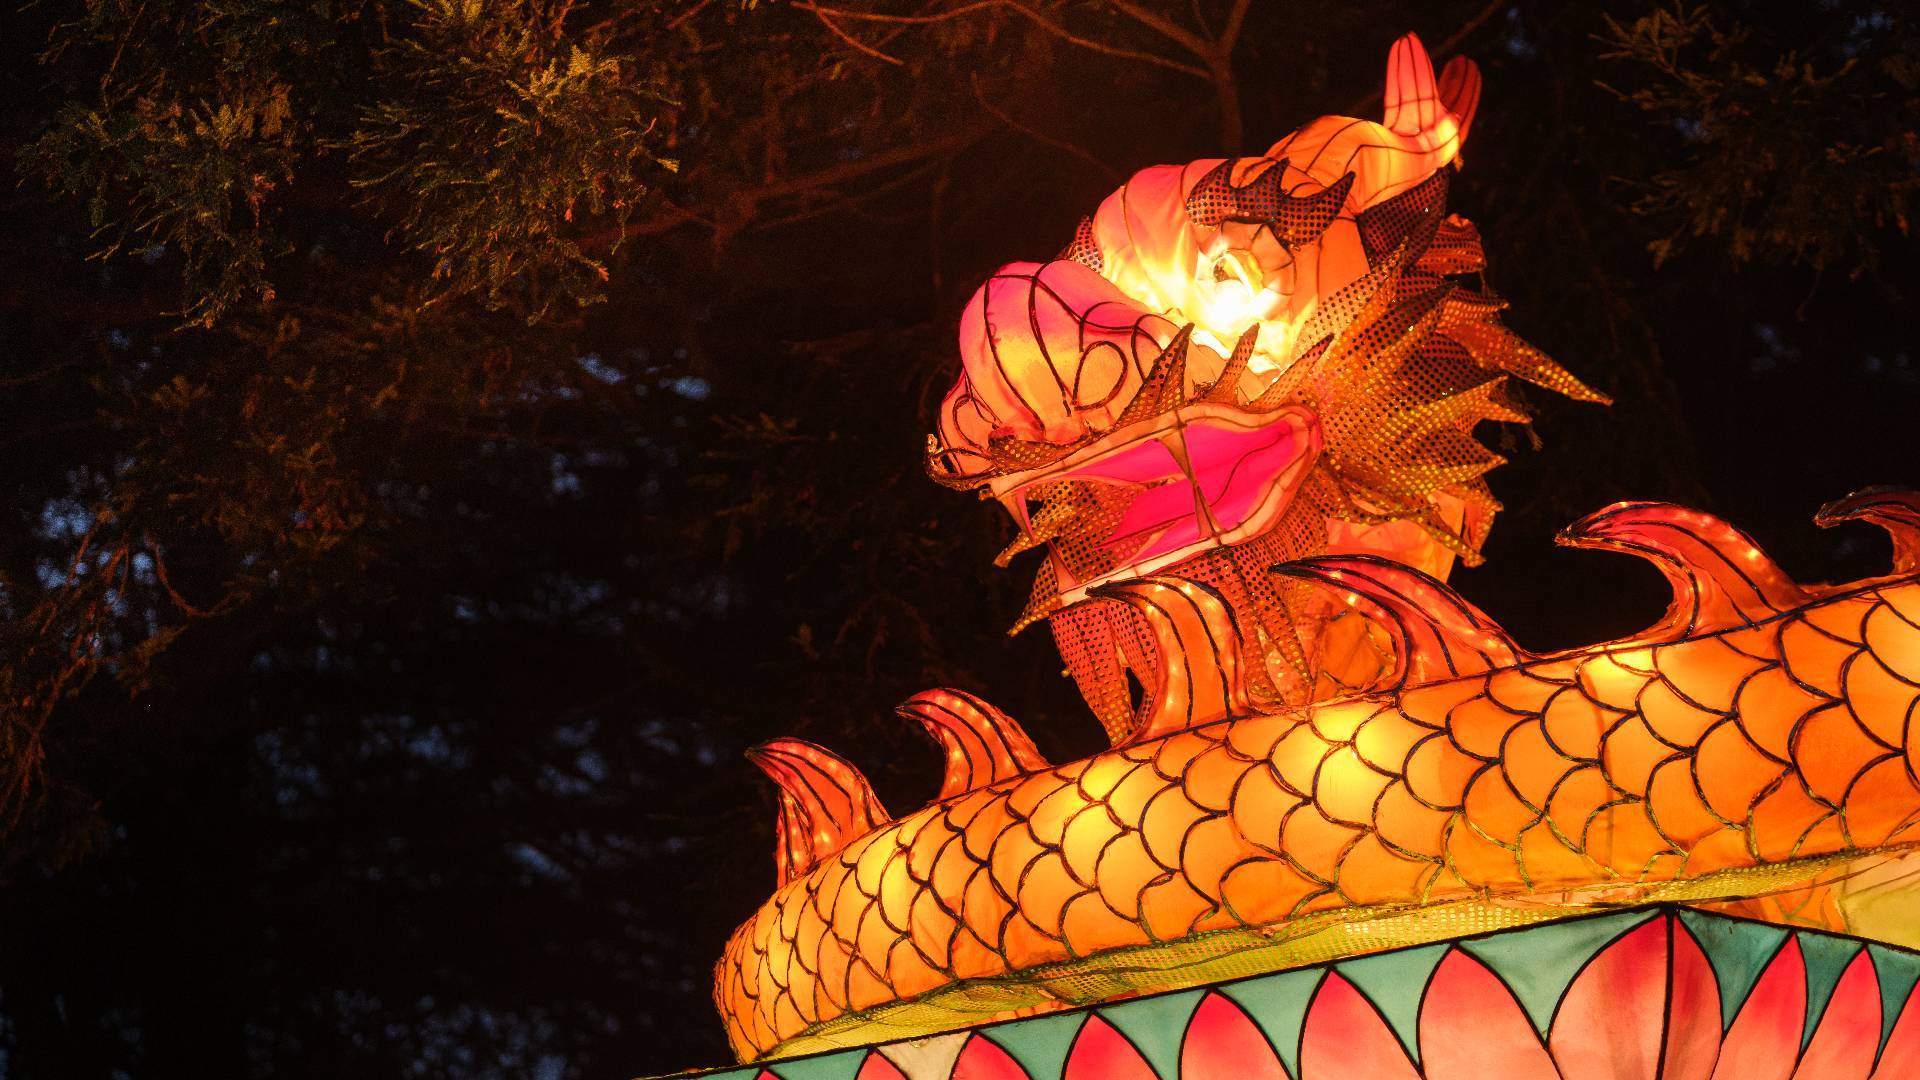 Auckland's BNZ Lantern Festival Is Back After Years of Cancellations in a Brand-New Location